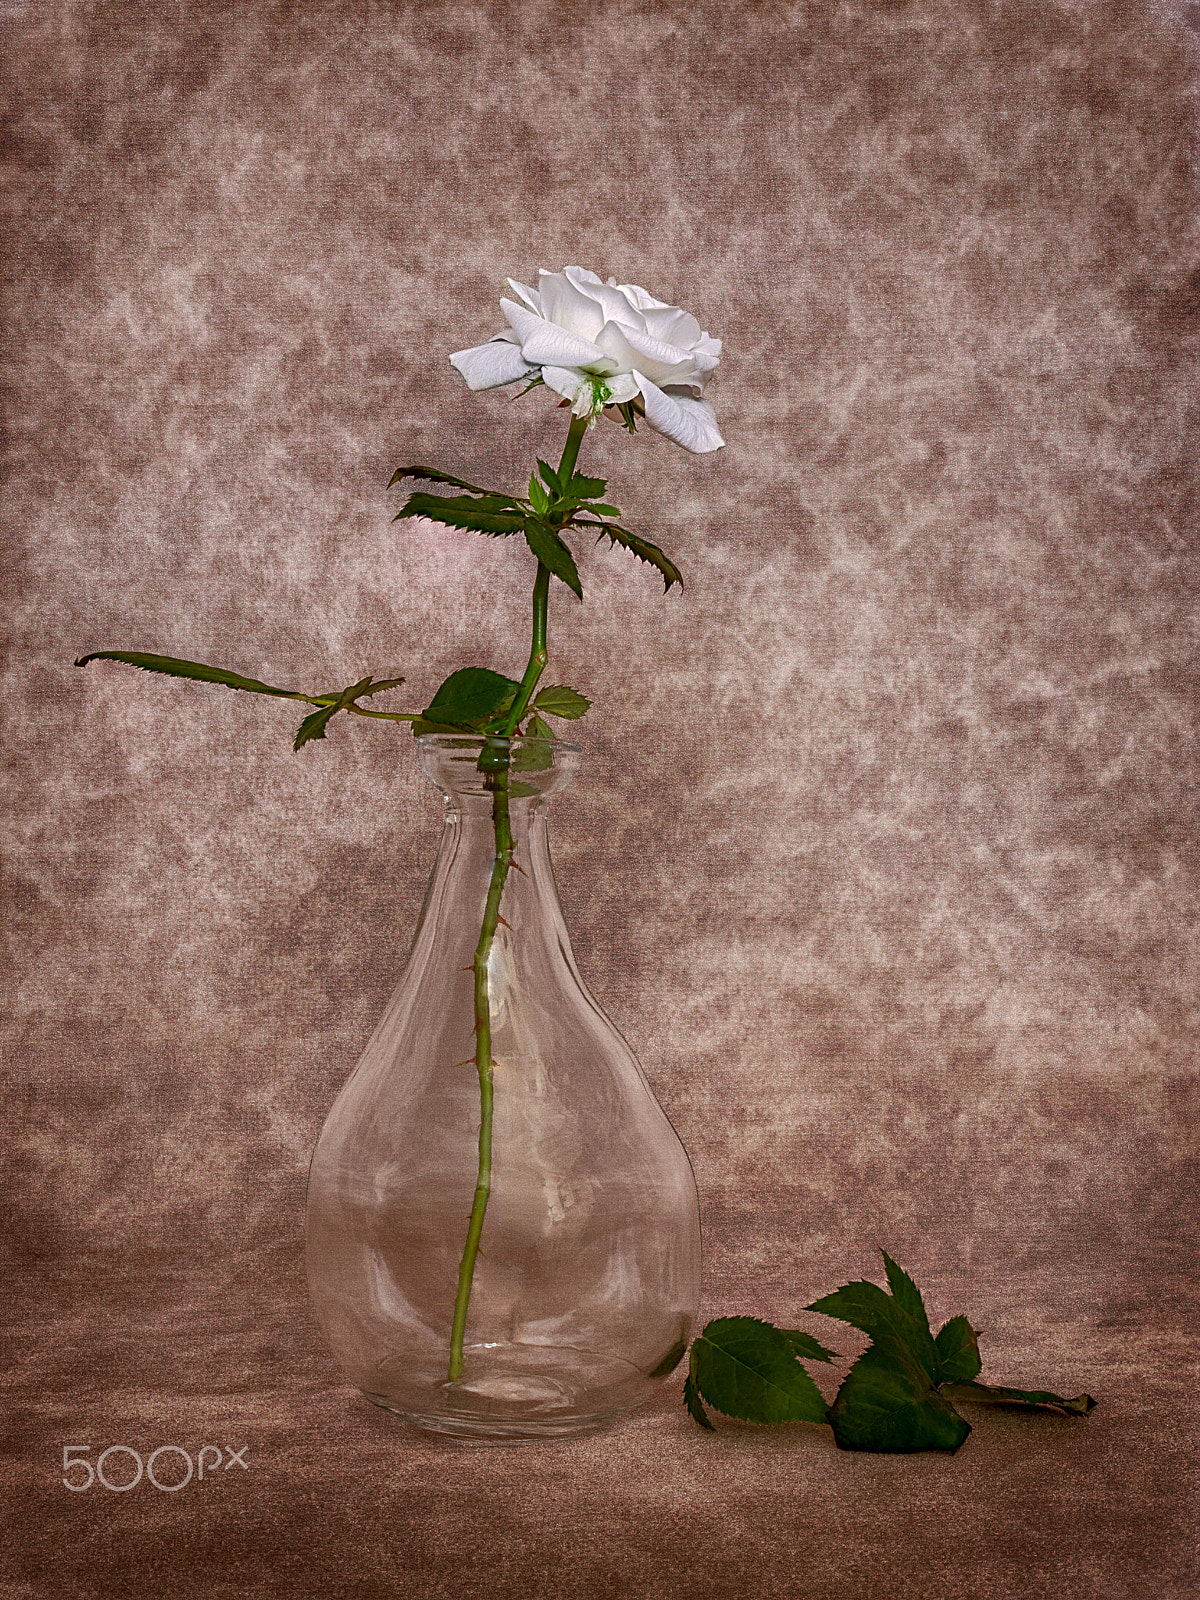 Nikon D90 + Tamron SP AF 17-50mm F2.8 XR Di II VC LD Aspherical (IF) sample photo. A lonely white rose photography